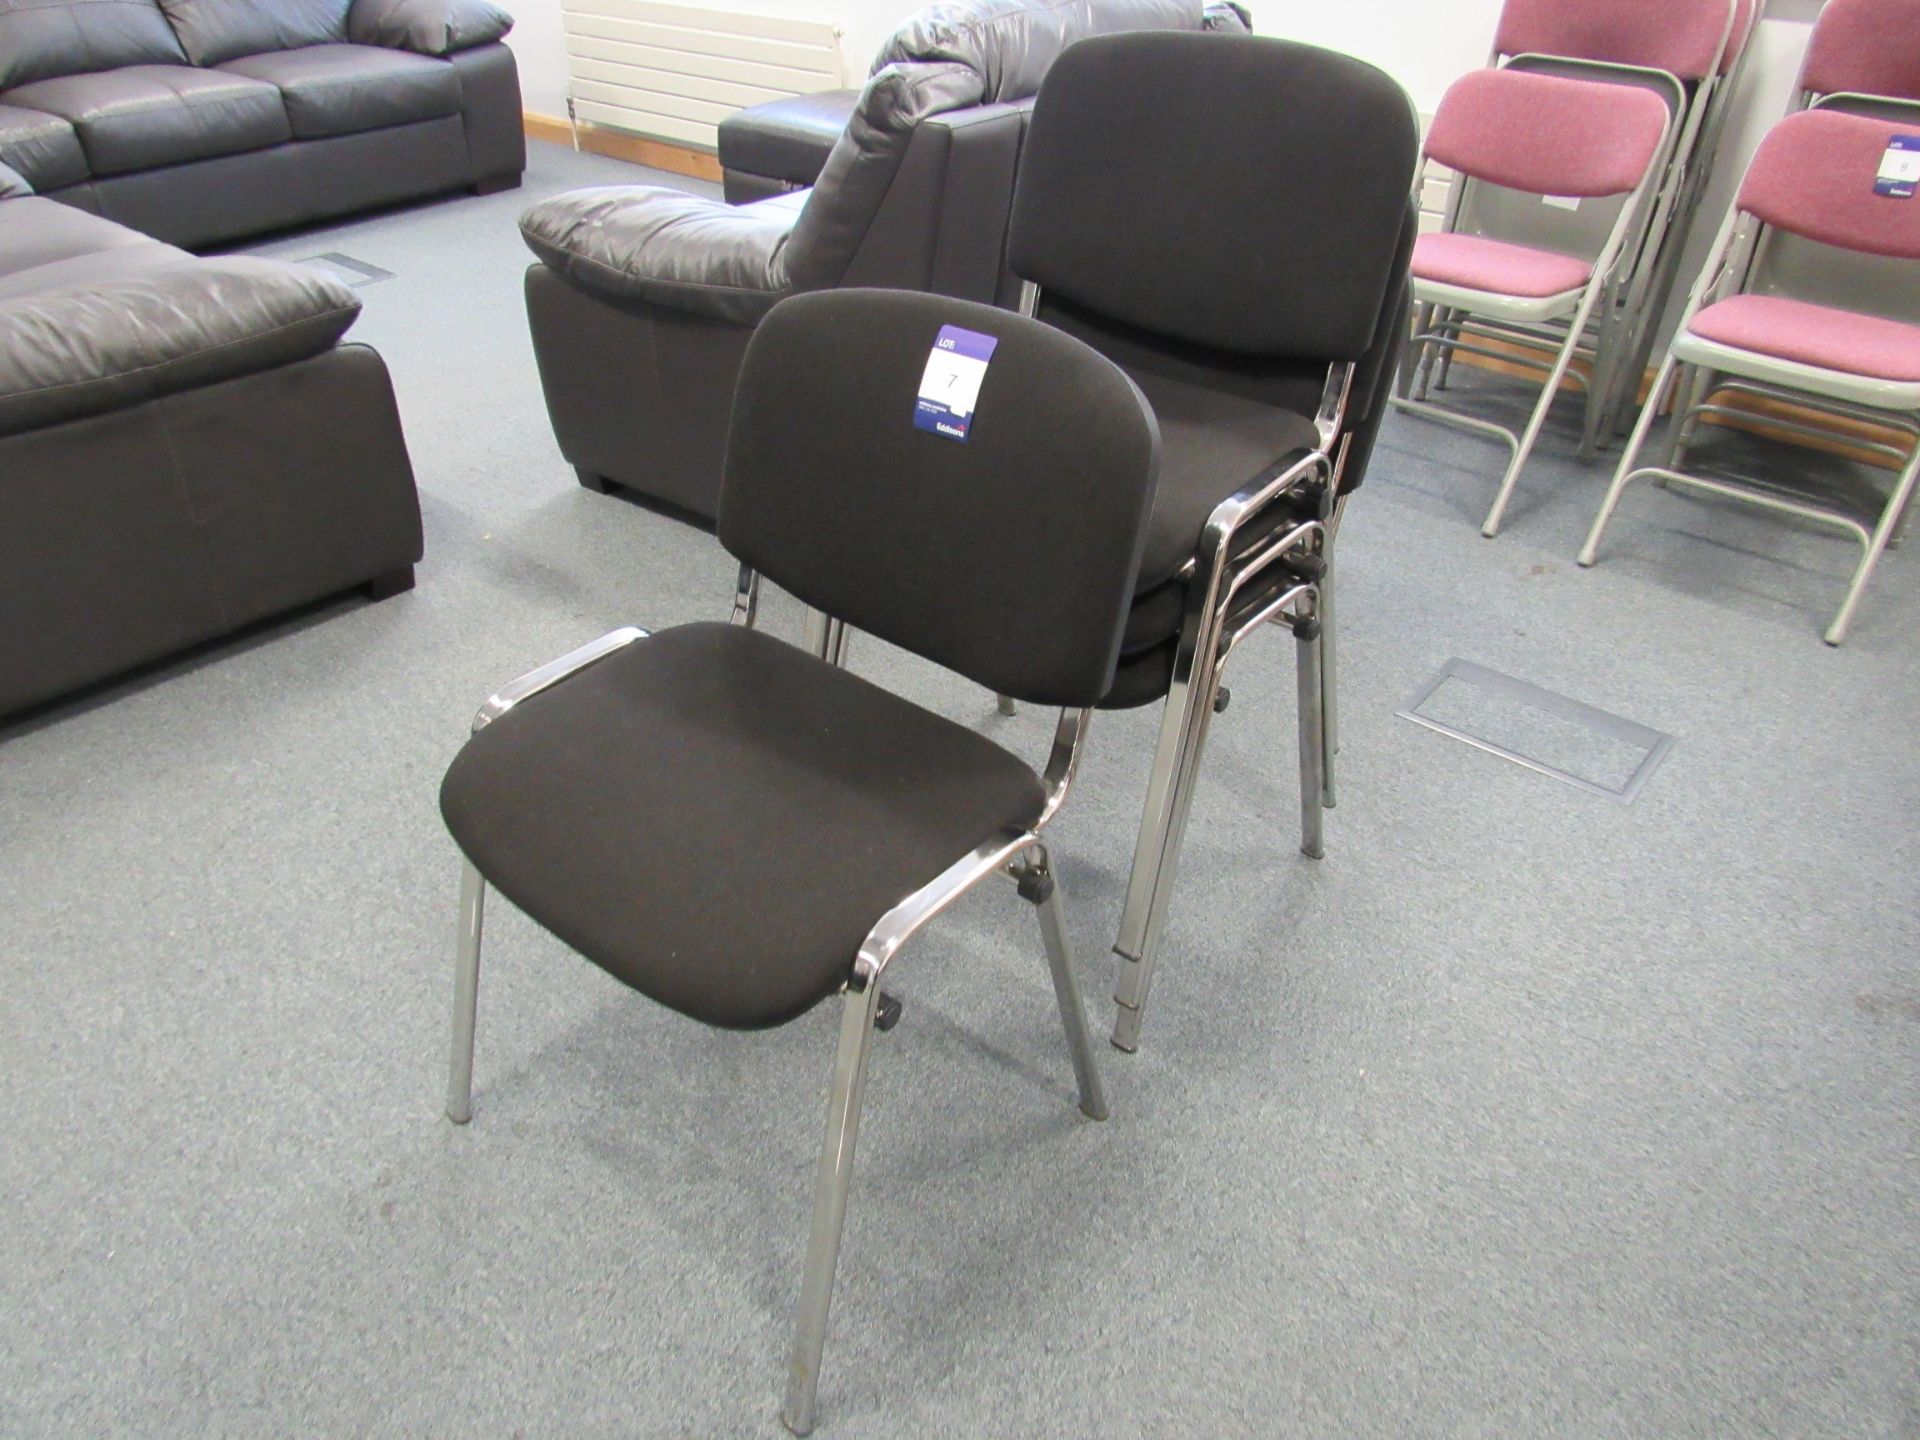 4 Chrome Framed Upholstered Meeting Chairs - Image 2 of 2